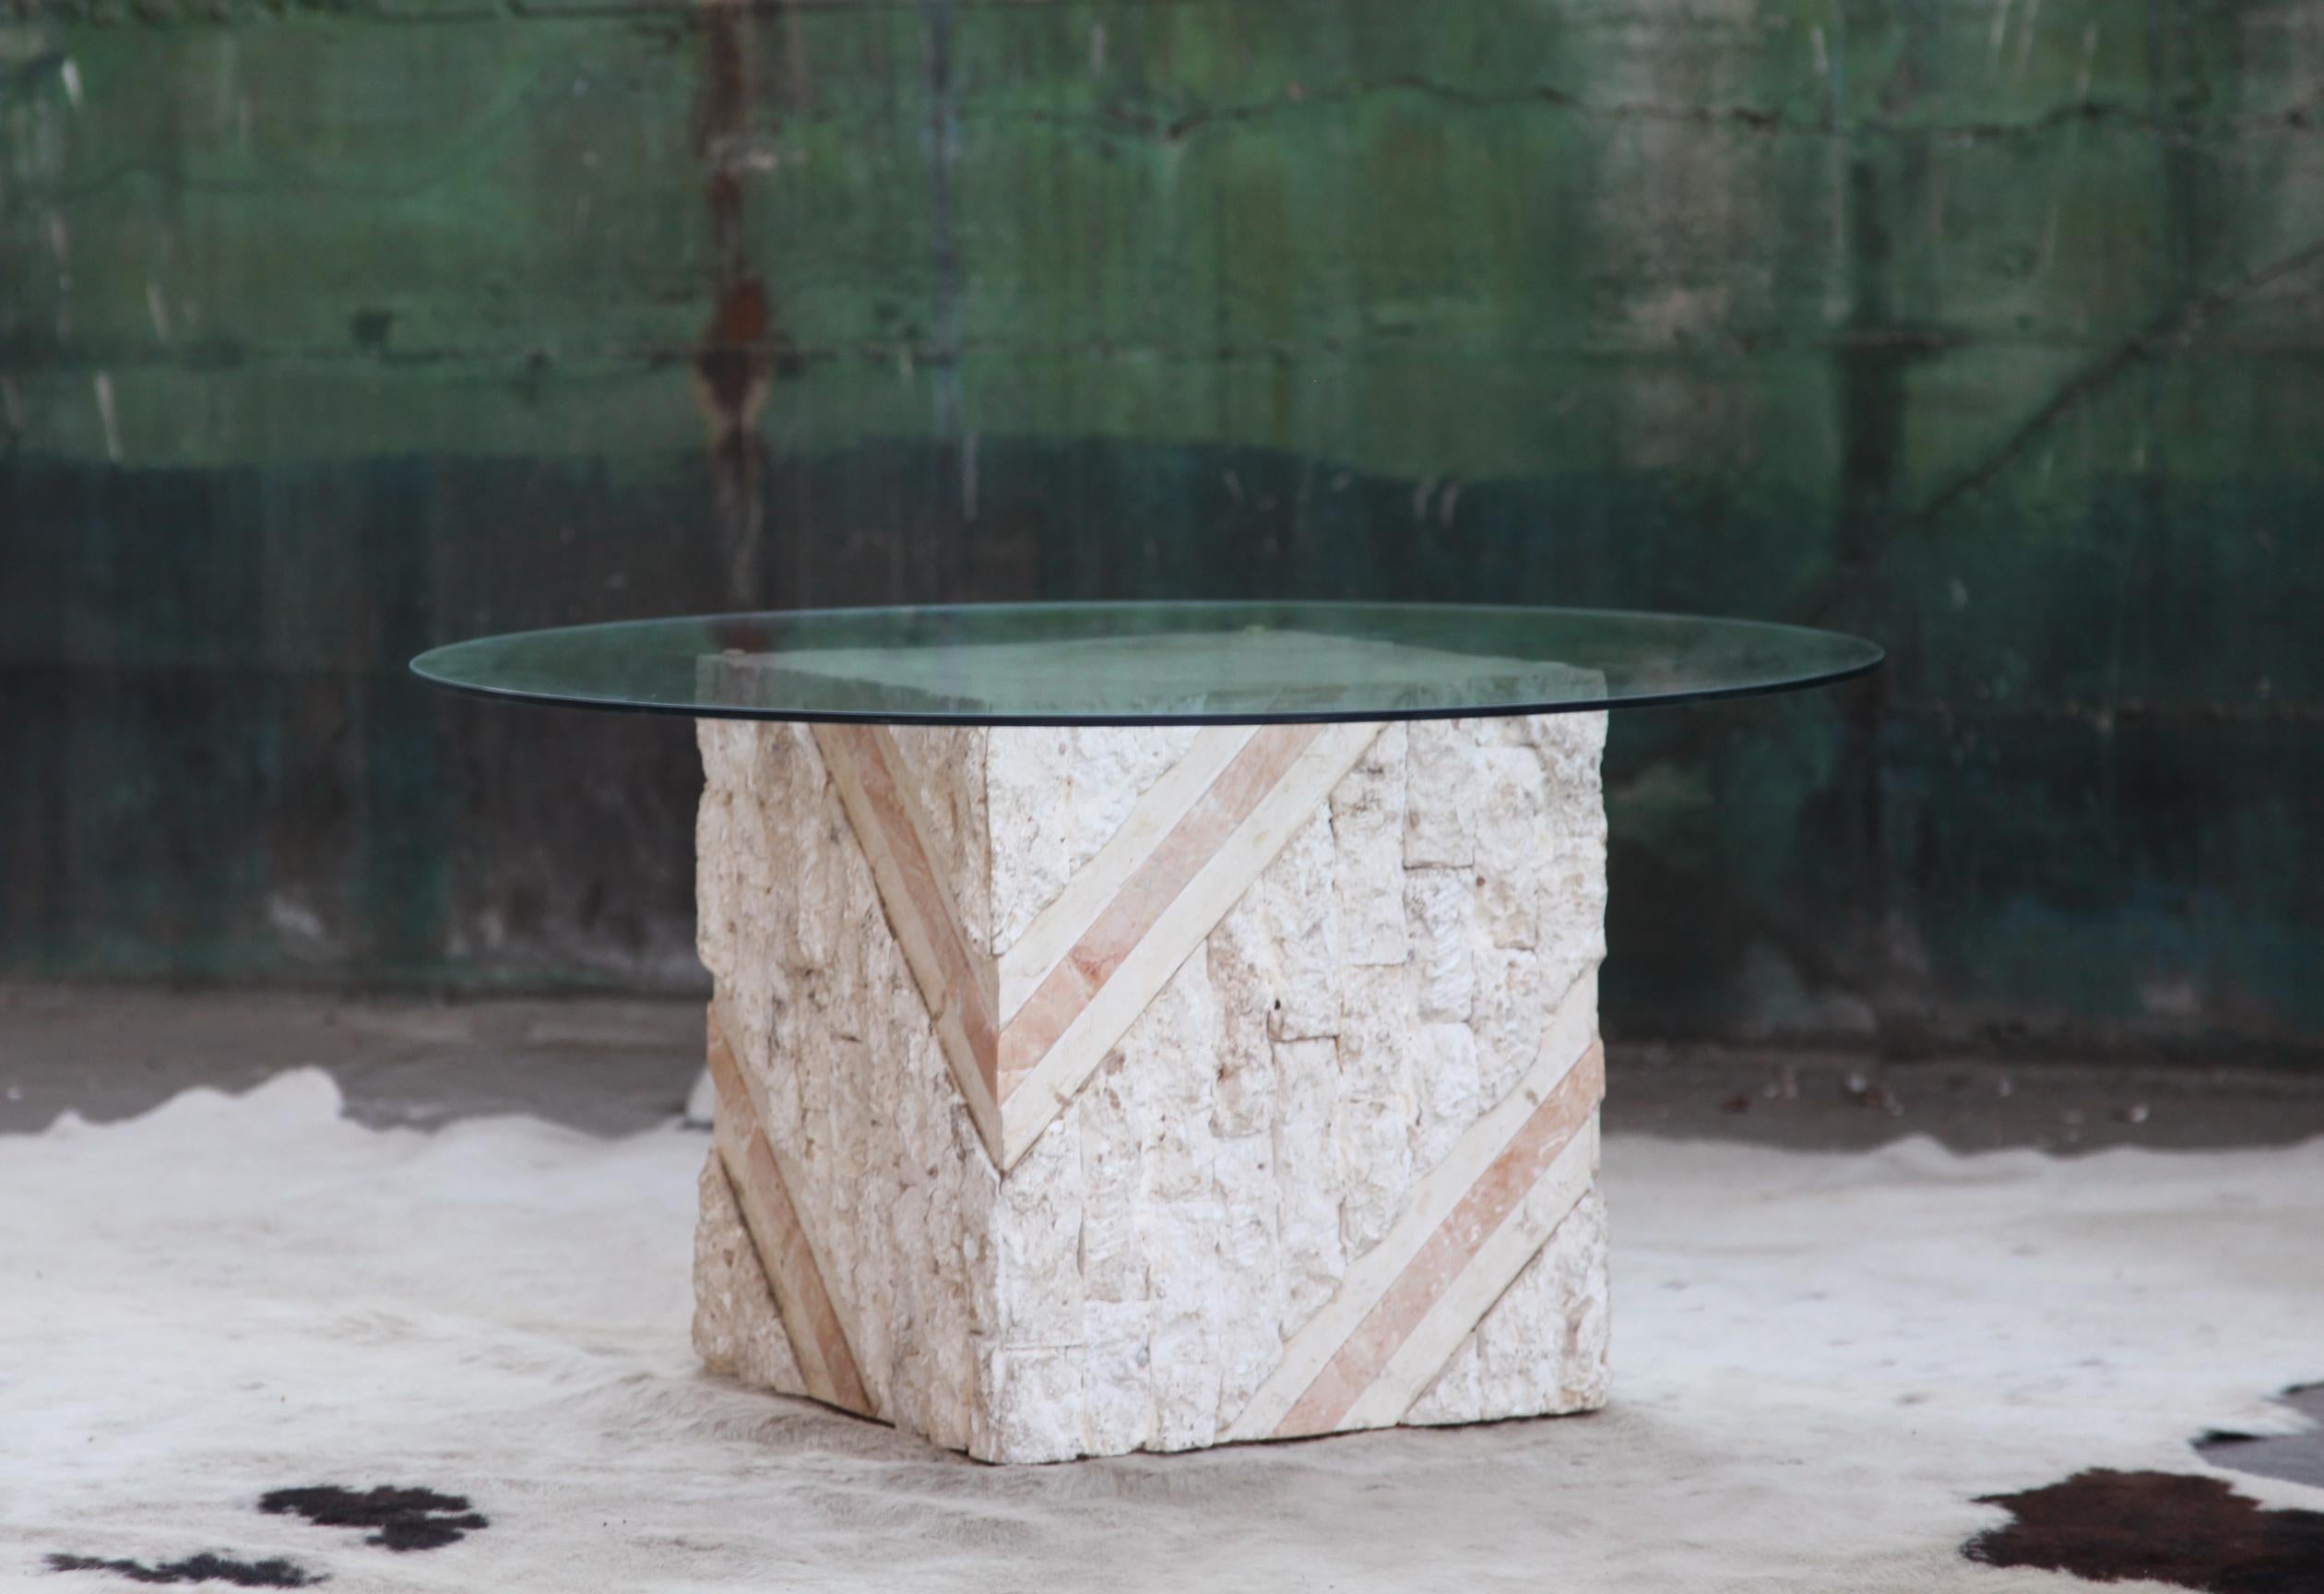 For sale here is a very excellent accent design piece. This Tessellated stone inlaid, travertine, marble and glass topped table would look great in a Modern, Mid-Century, Miami Regency or Hollywood Regency decor. It features a fabulous geometric